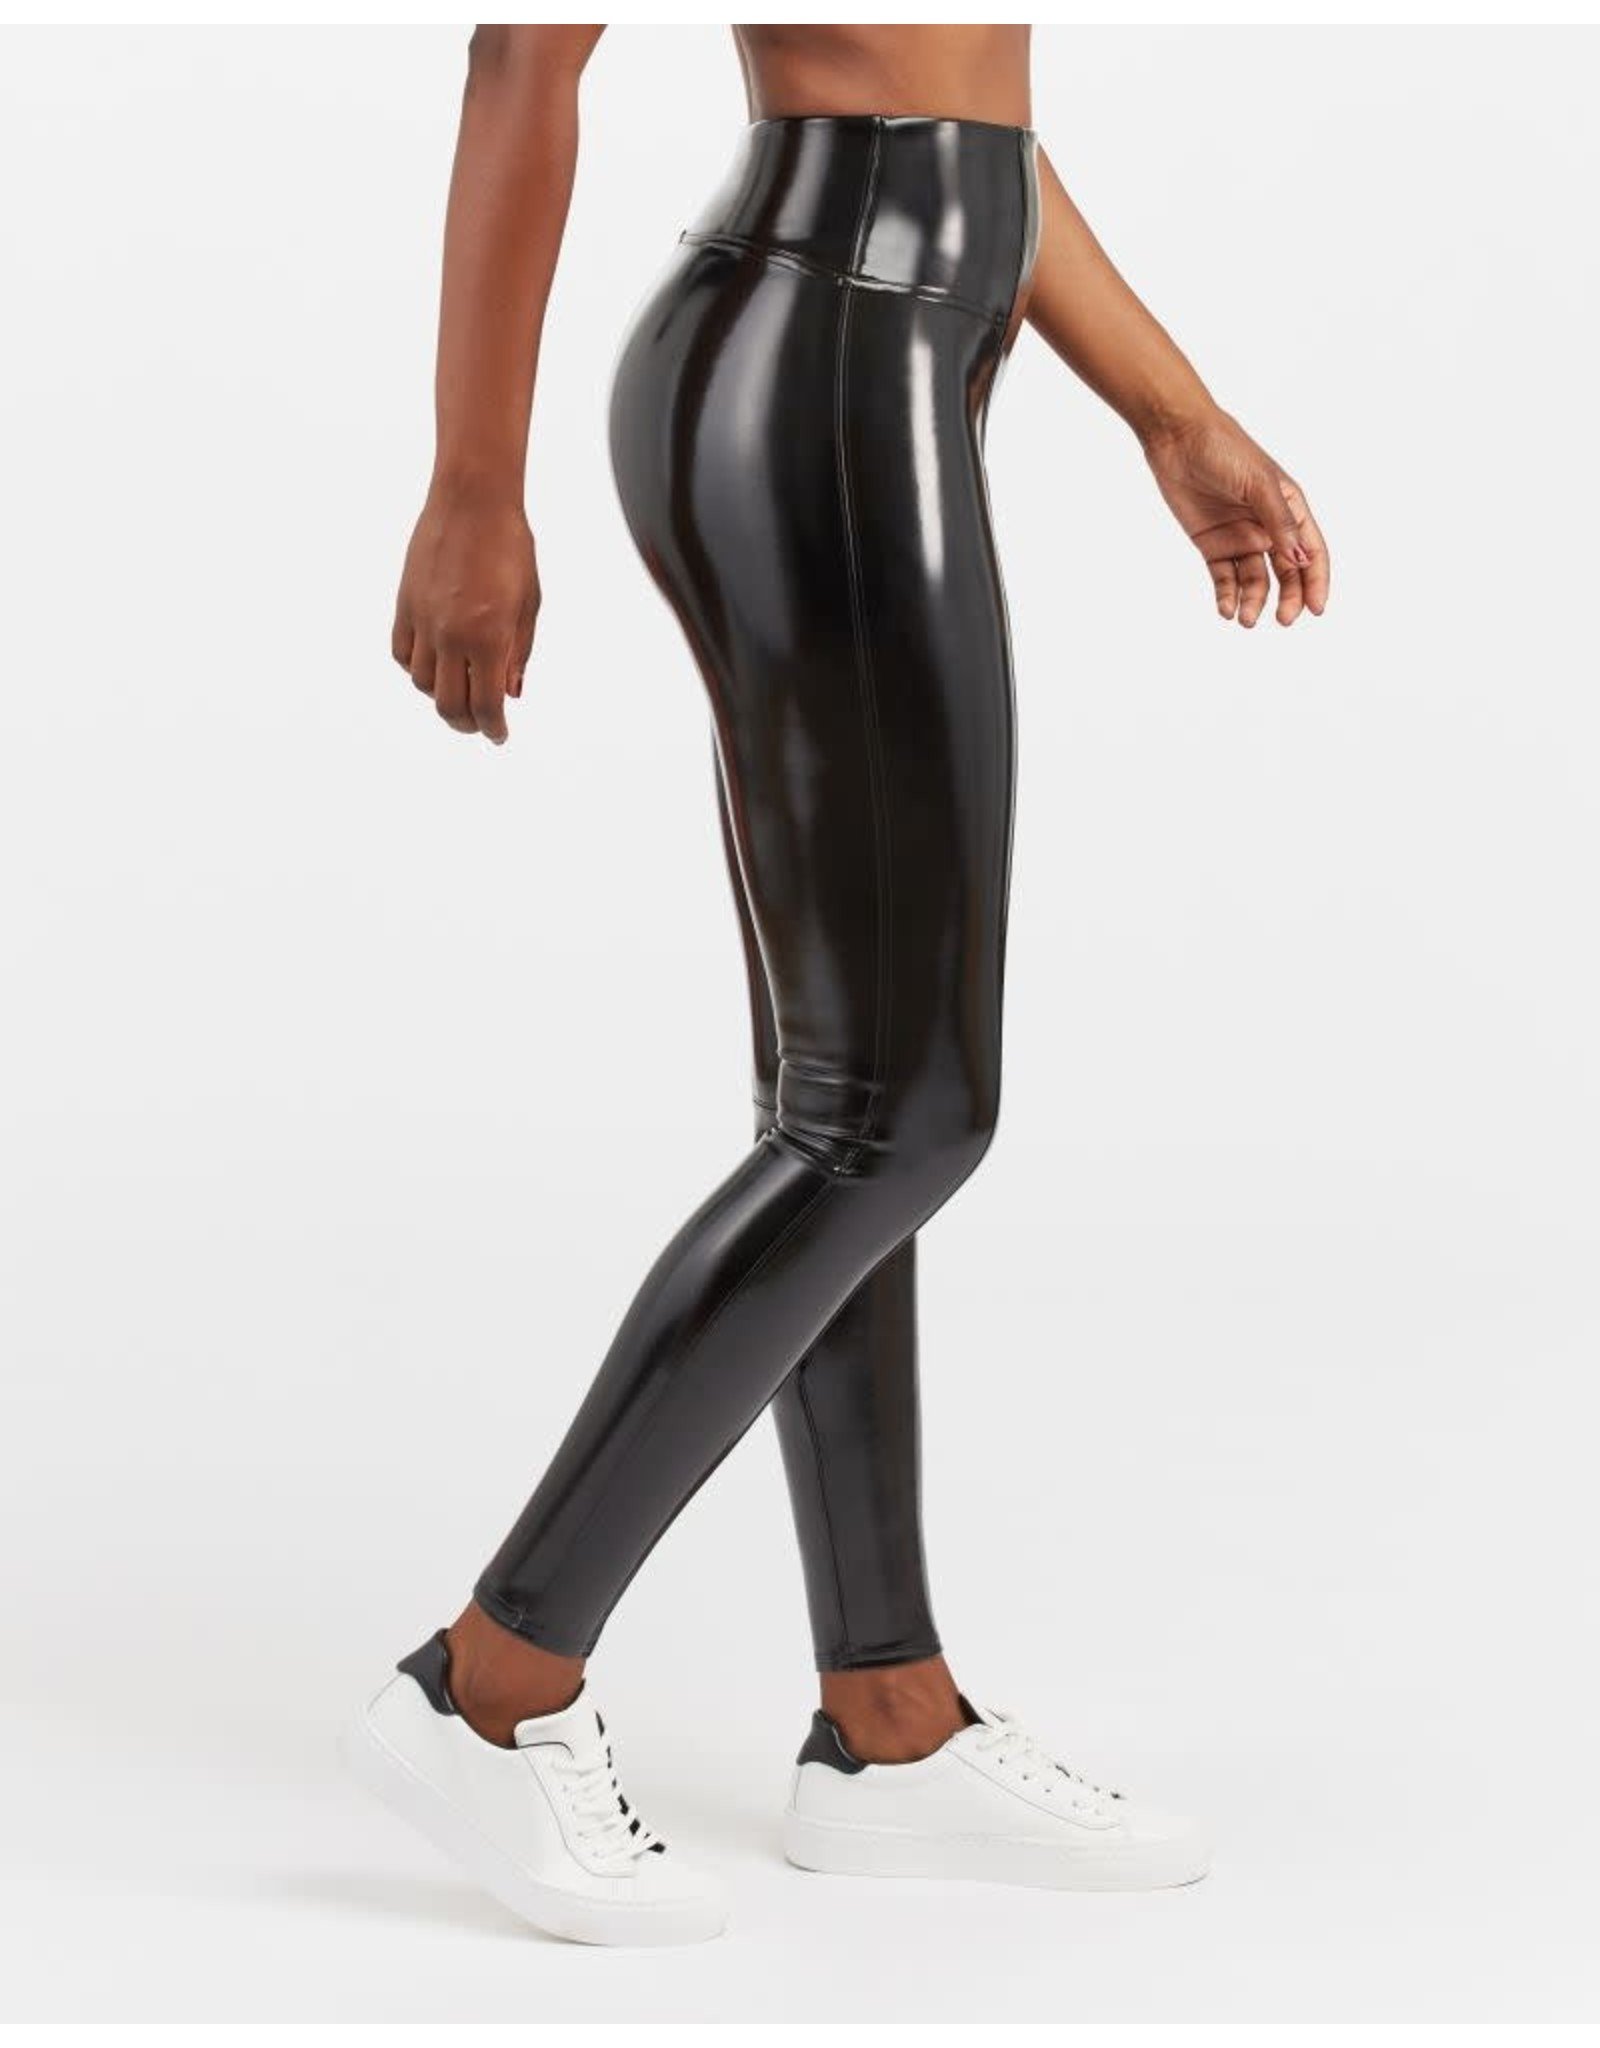 spanx patent leather leggings review